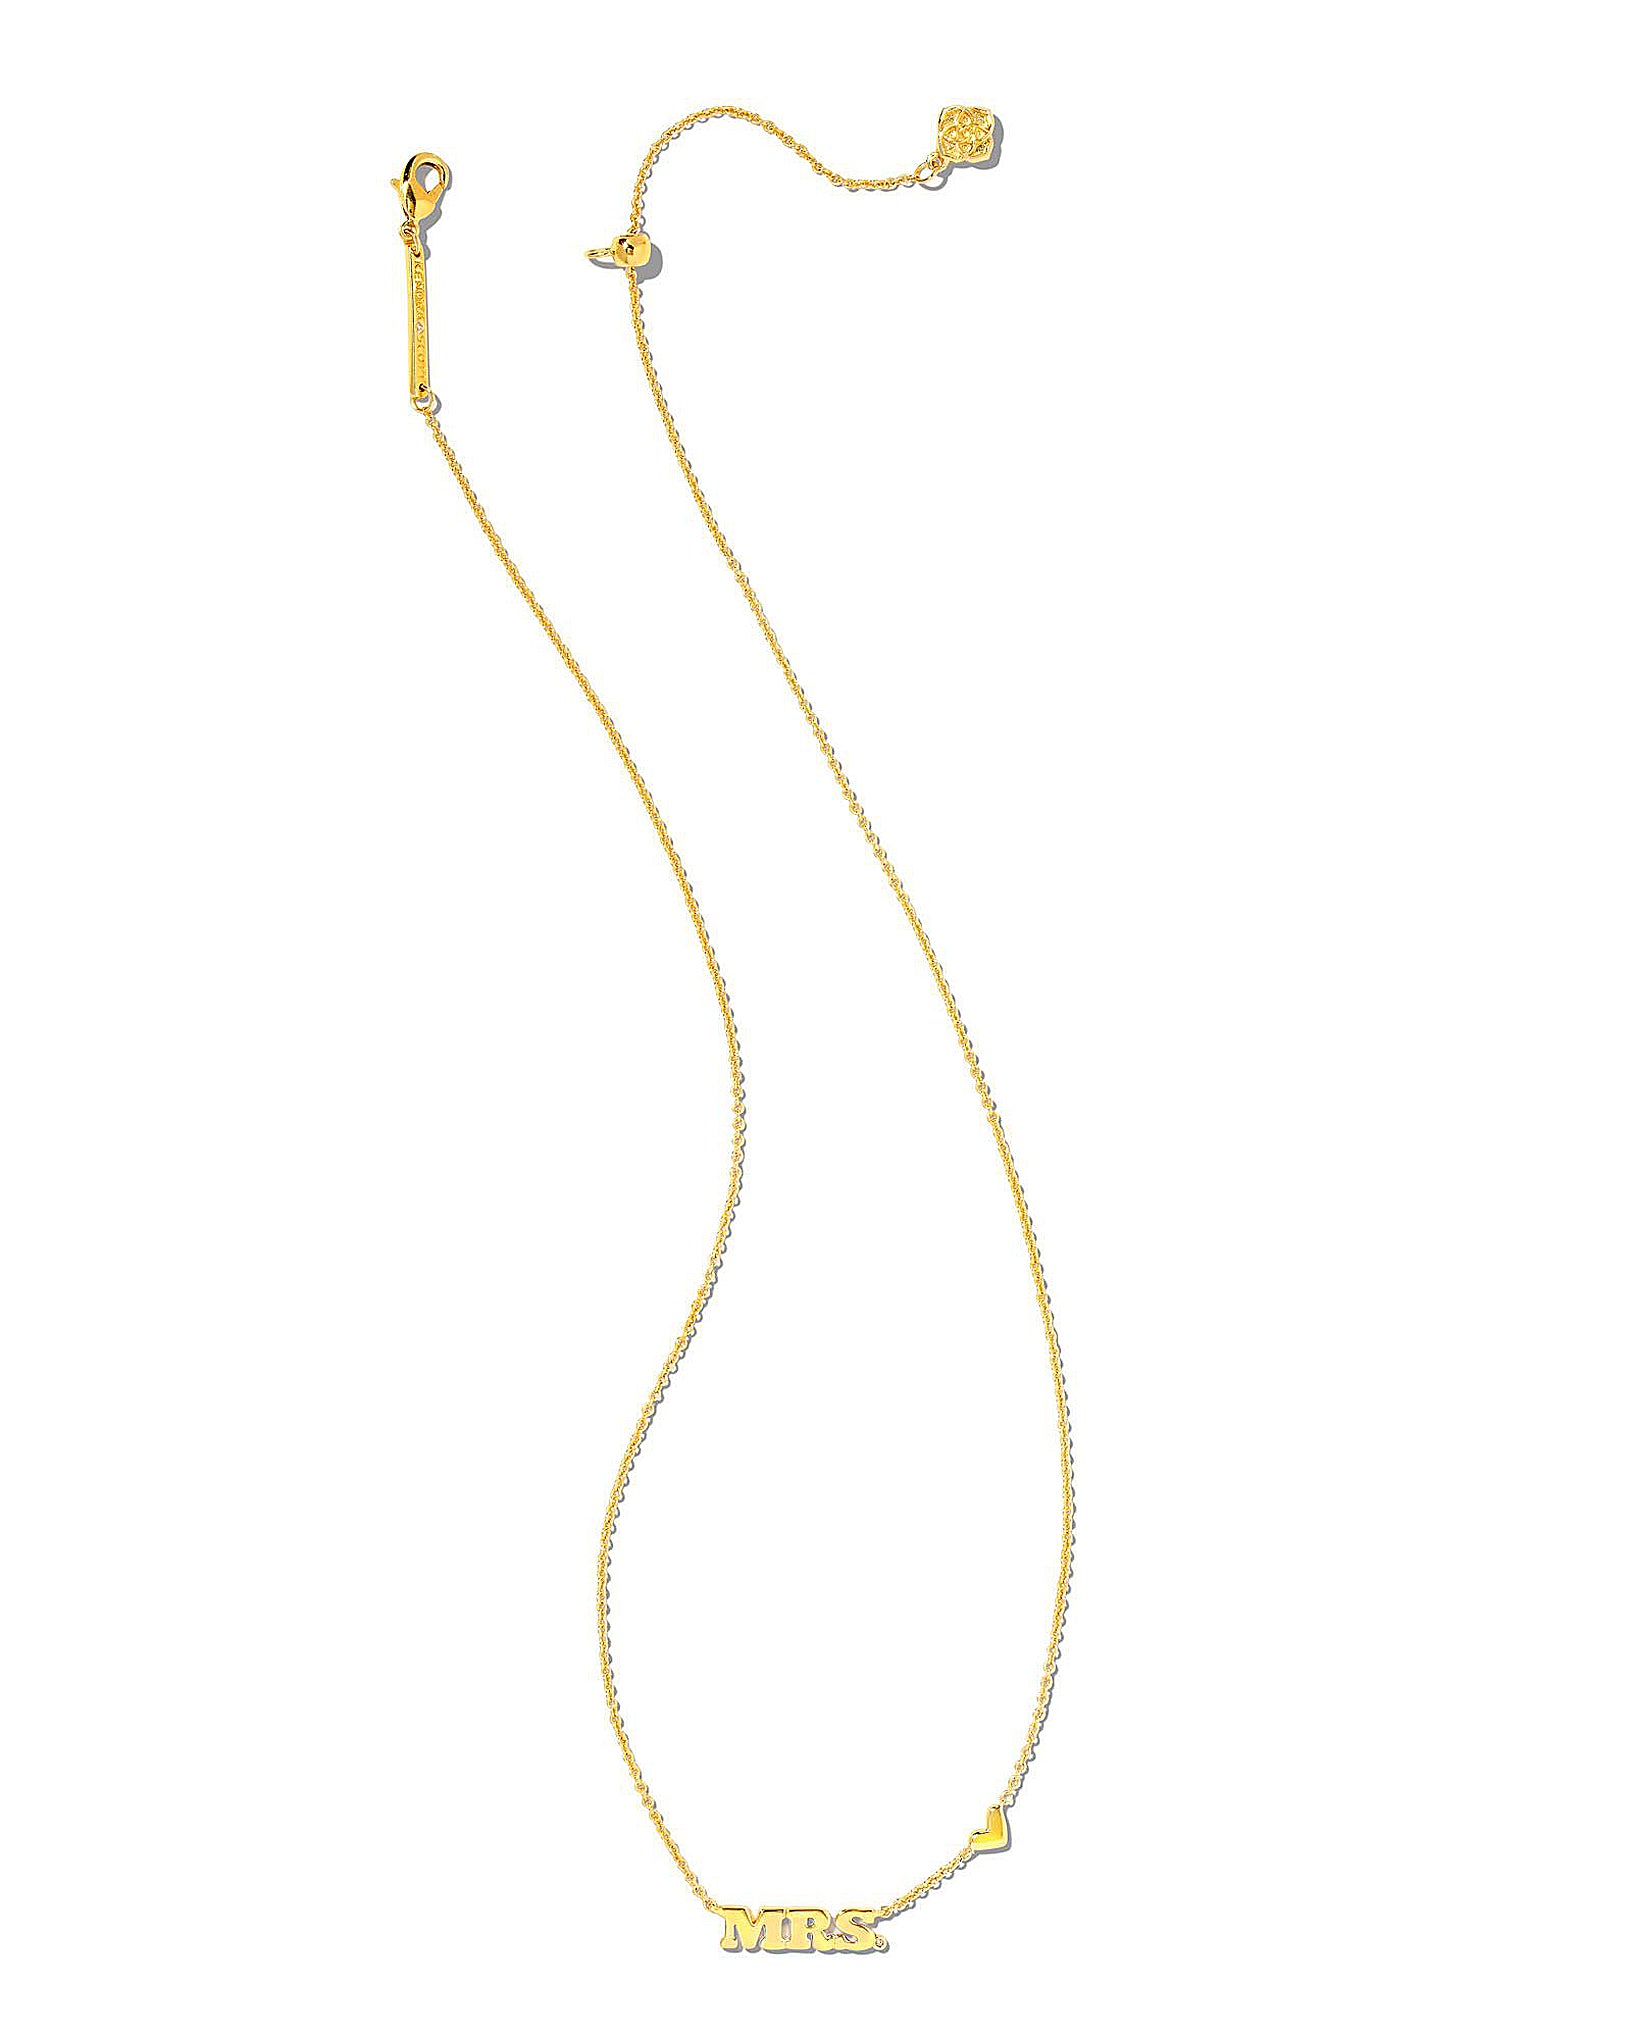 Kendra Scott Mrs. Lettered Pendant Necklace in Gold